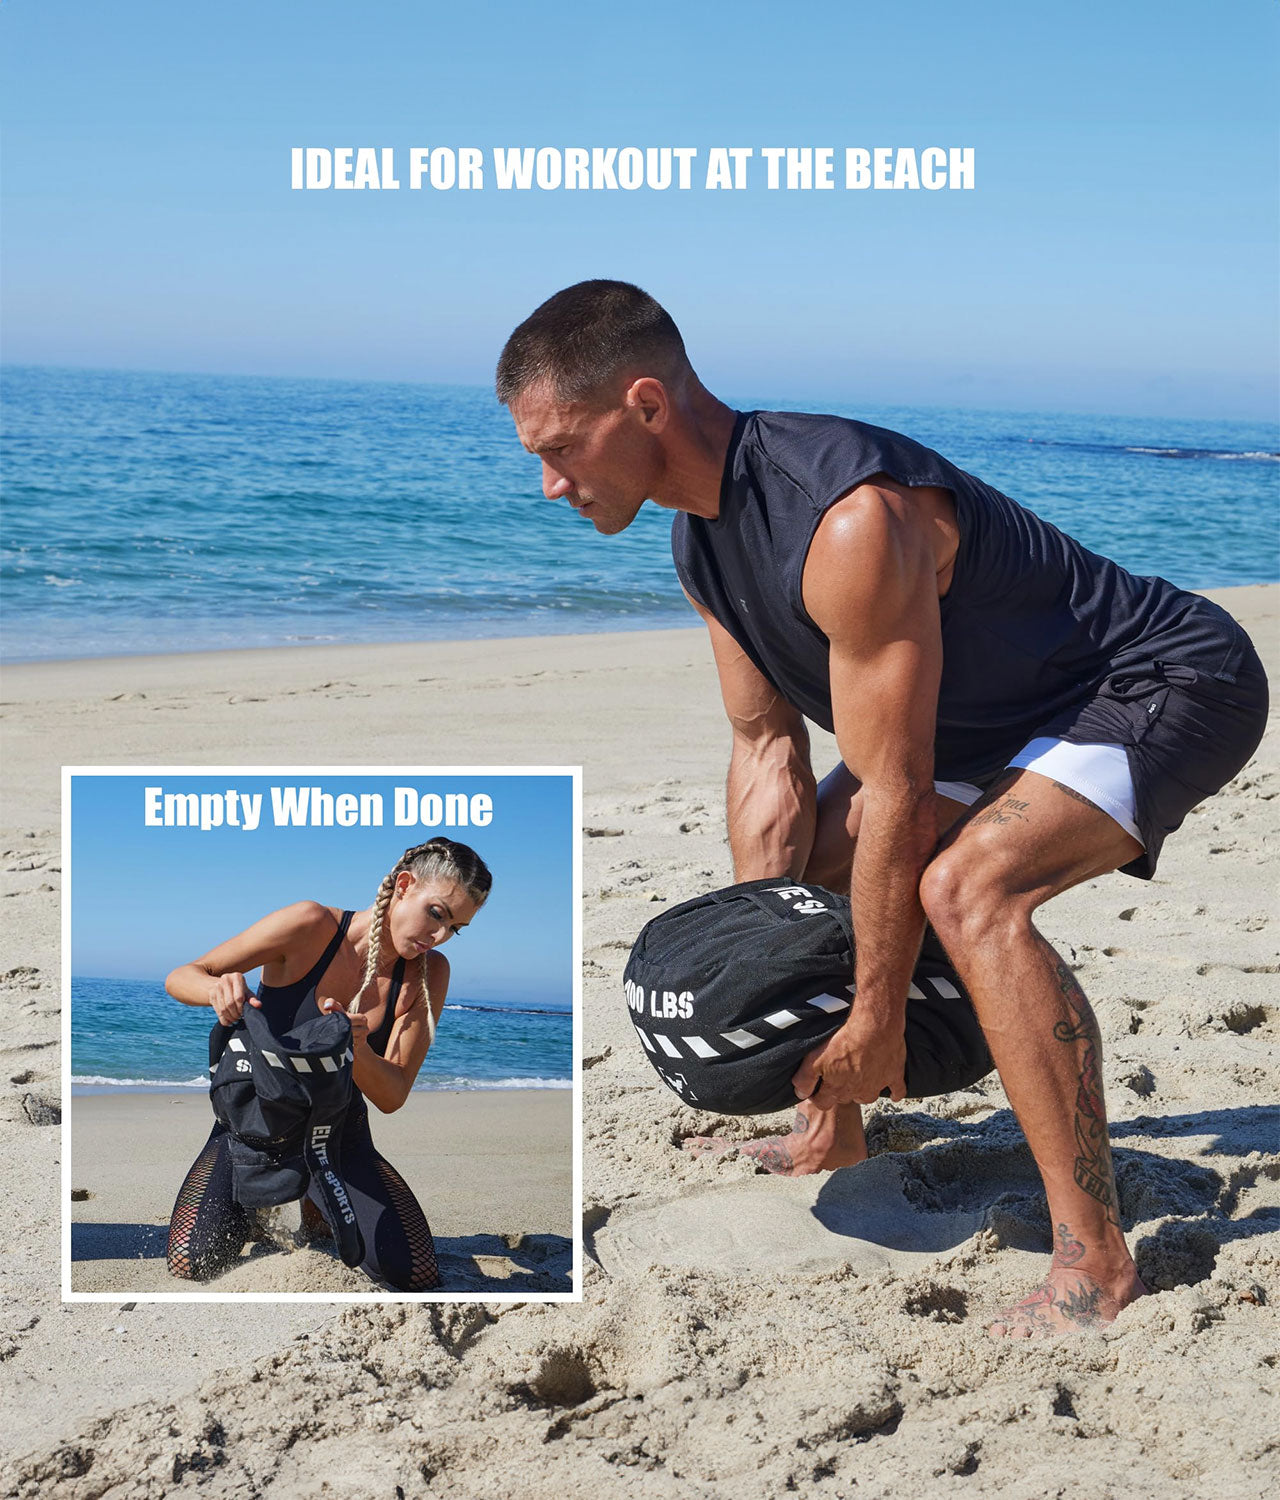 Elite Sports Core Round Workout Sandbag 70 lbs Ideal For Workout At the Beach